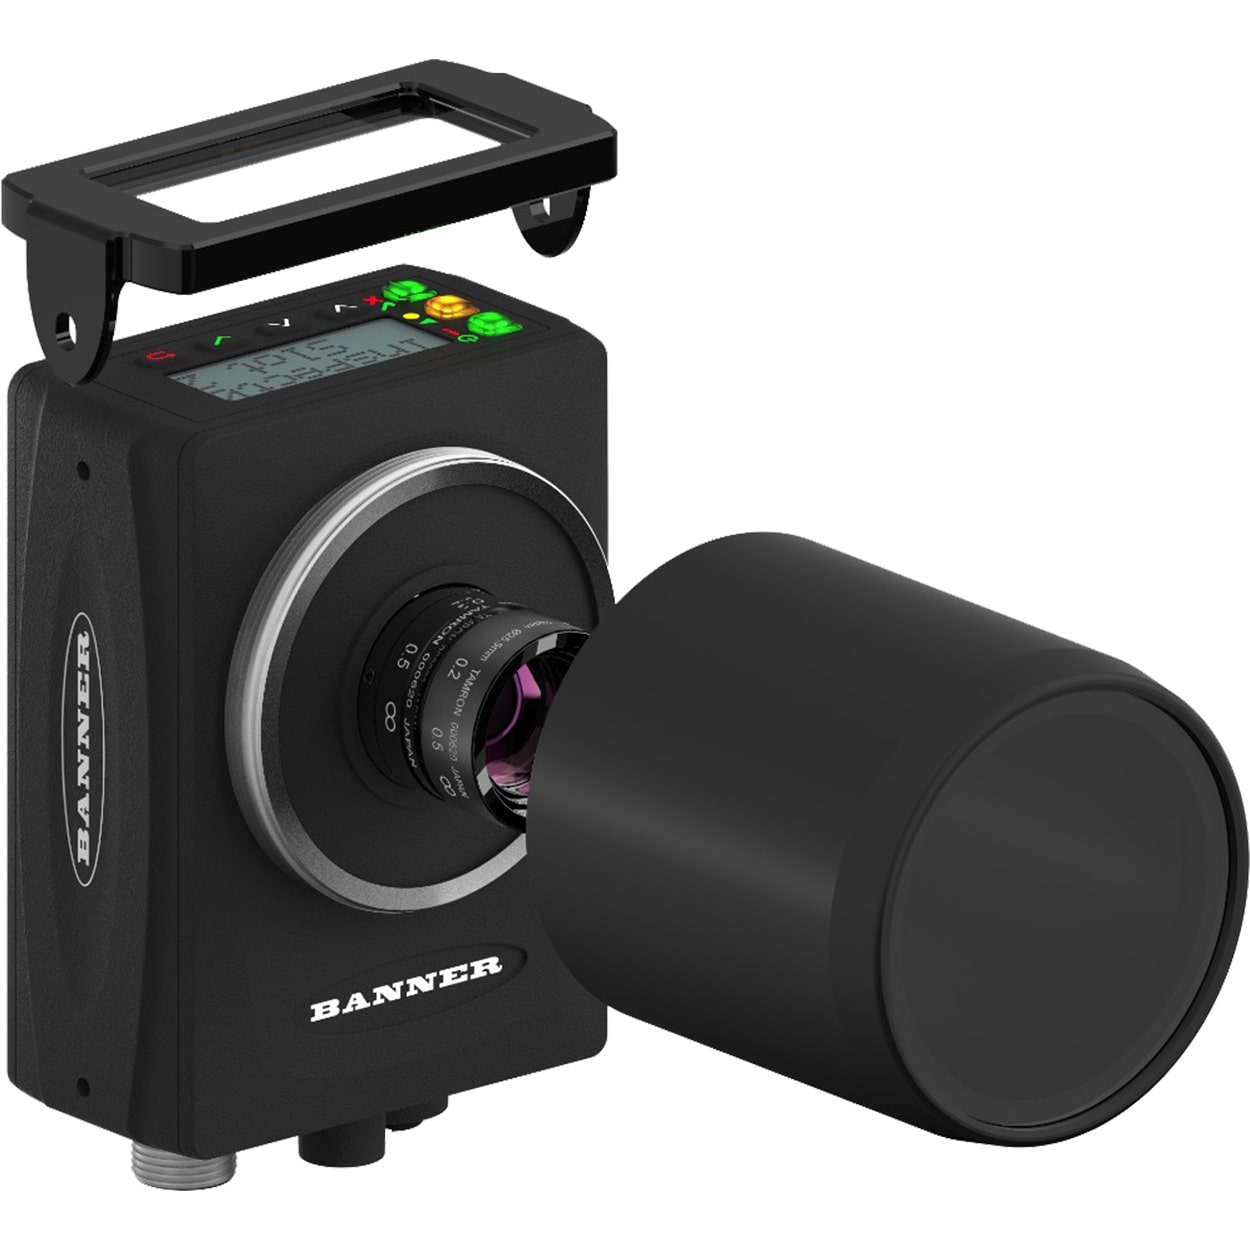 BANNER VE SERIES SMART CAMERA VISION AND BARCODE IDENTIFICATION CAMERA